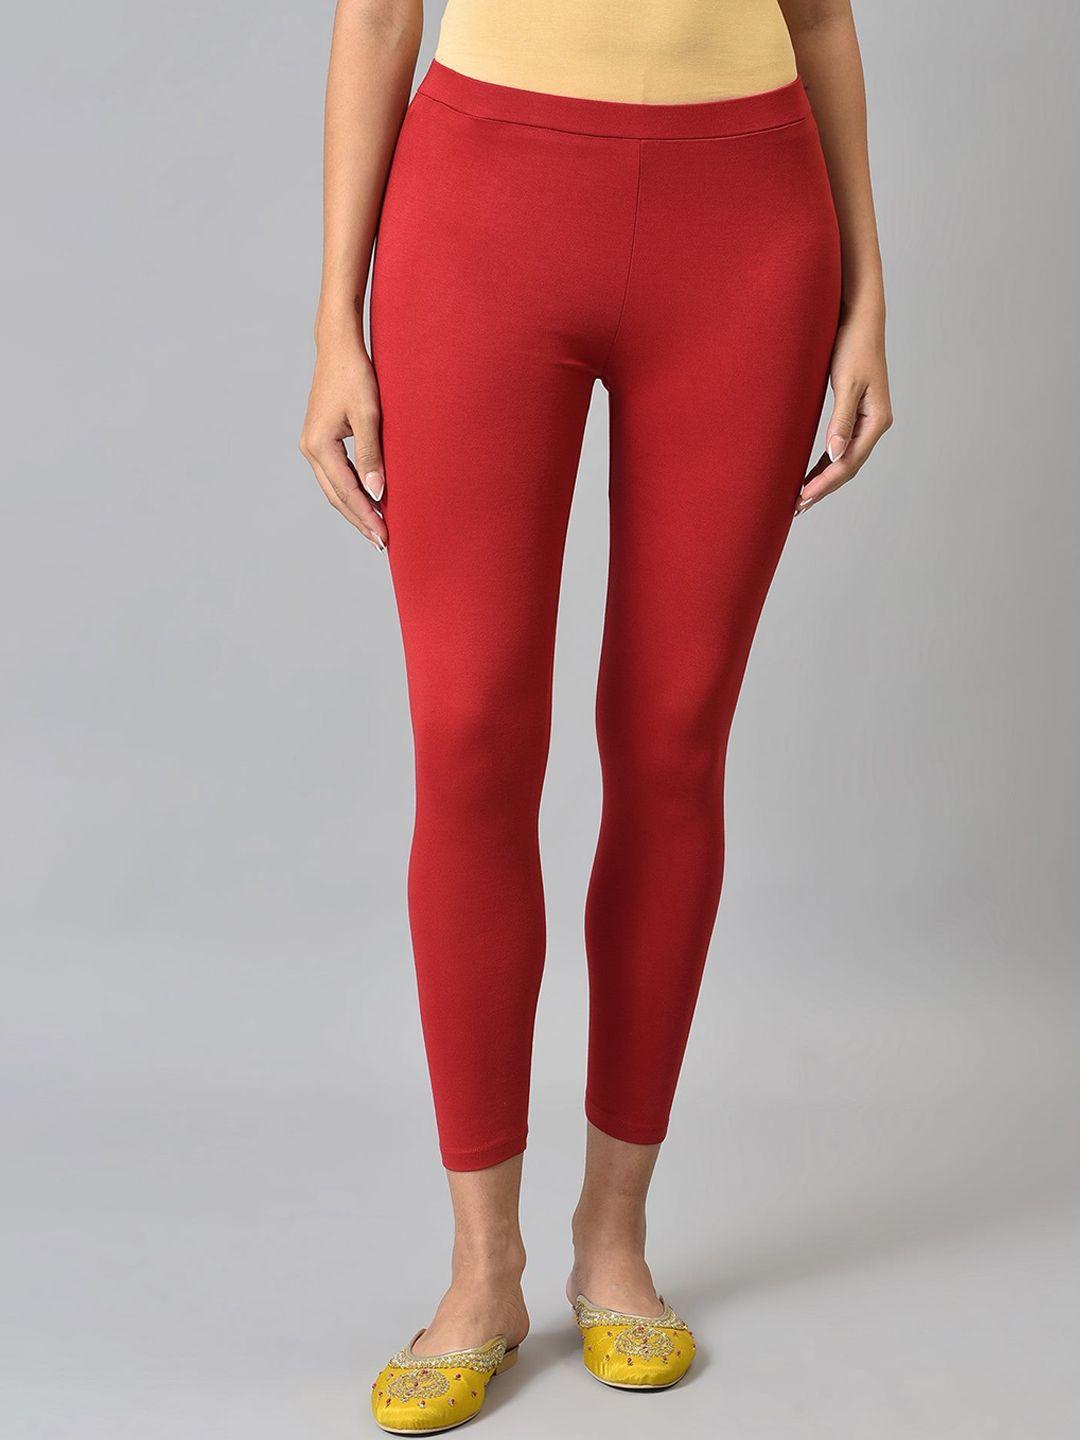 w-red-women-solid-ankle-length-leggings